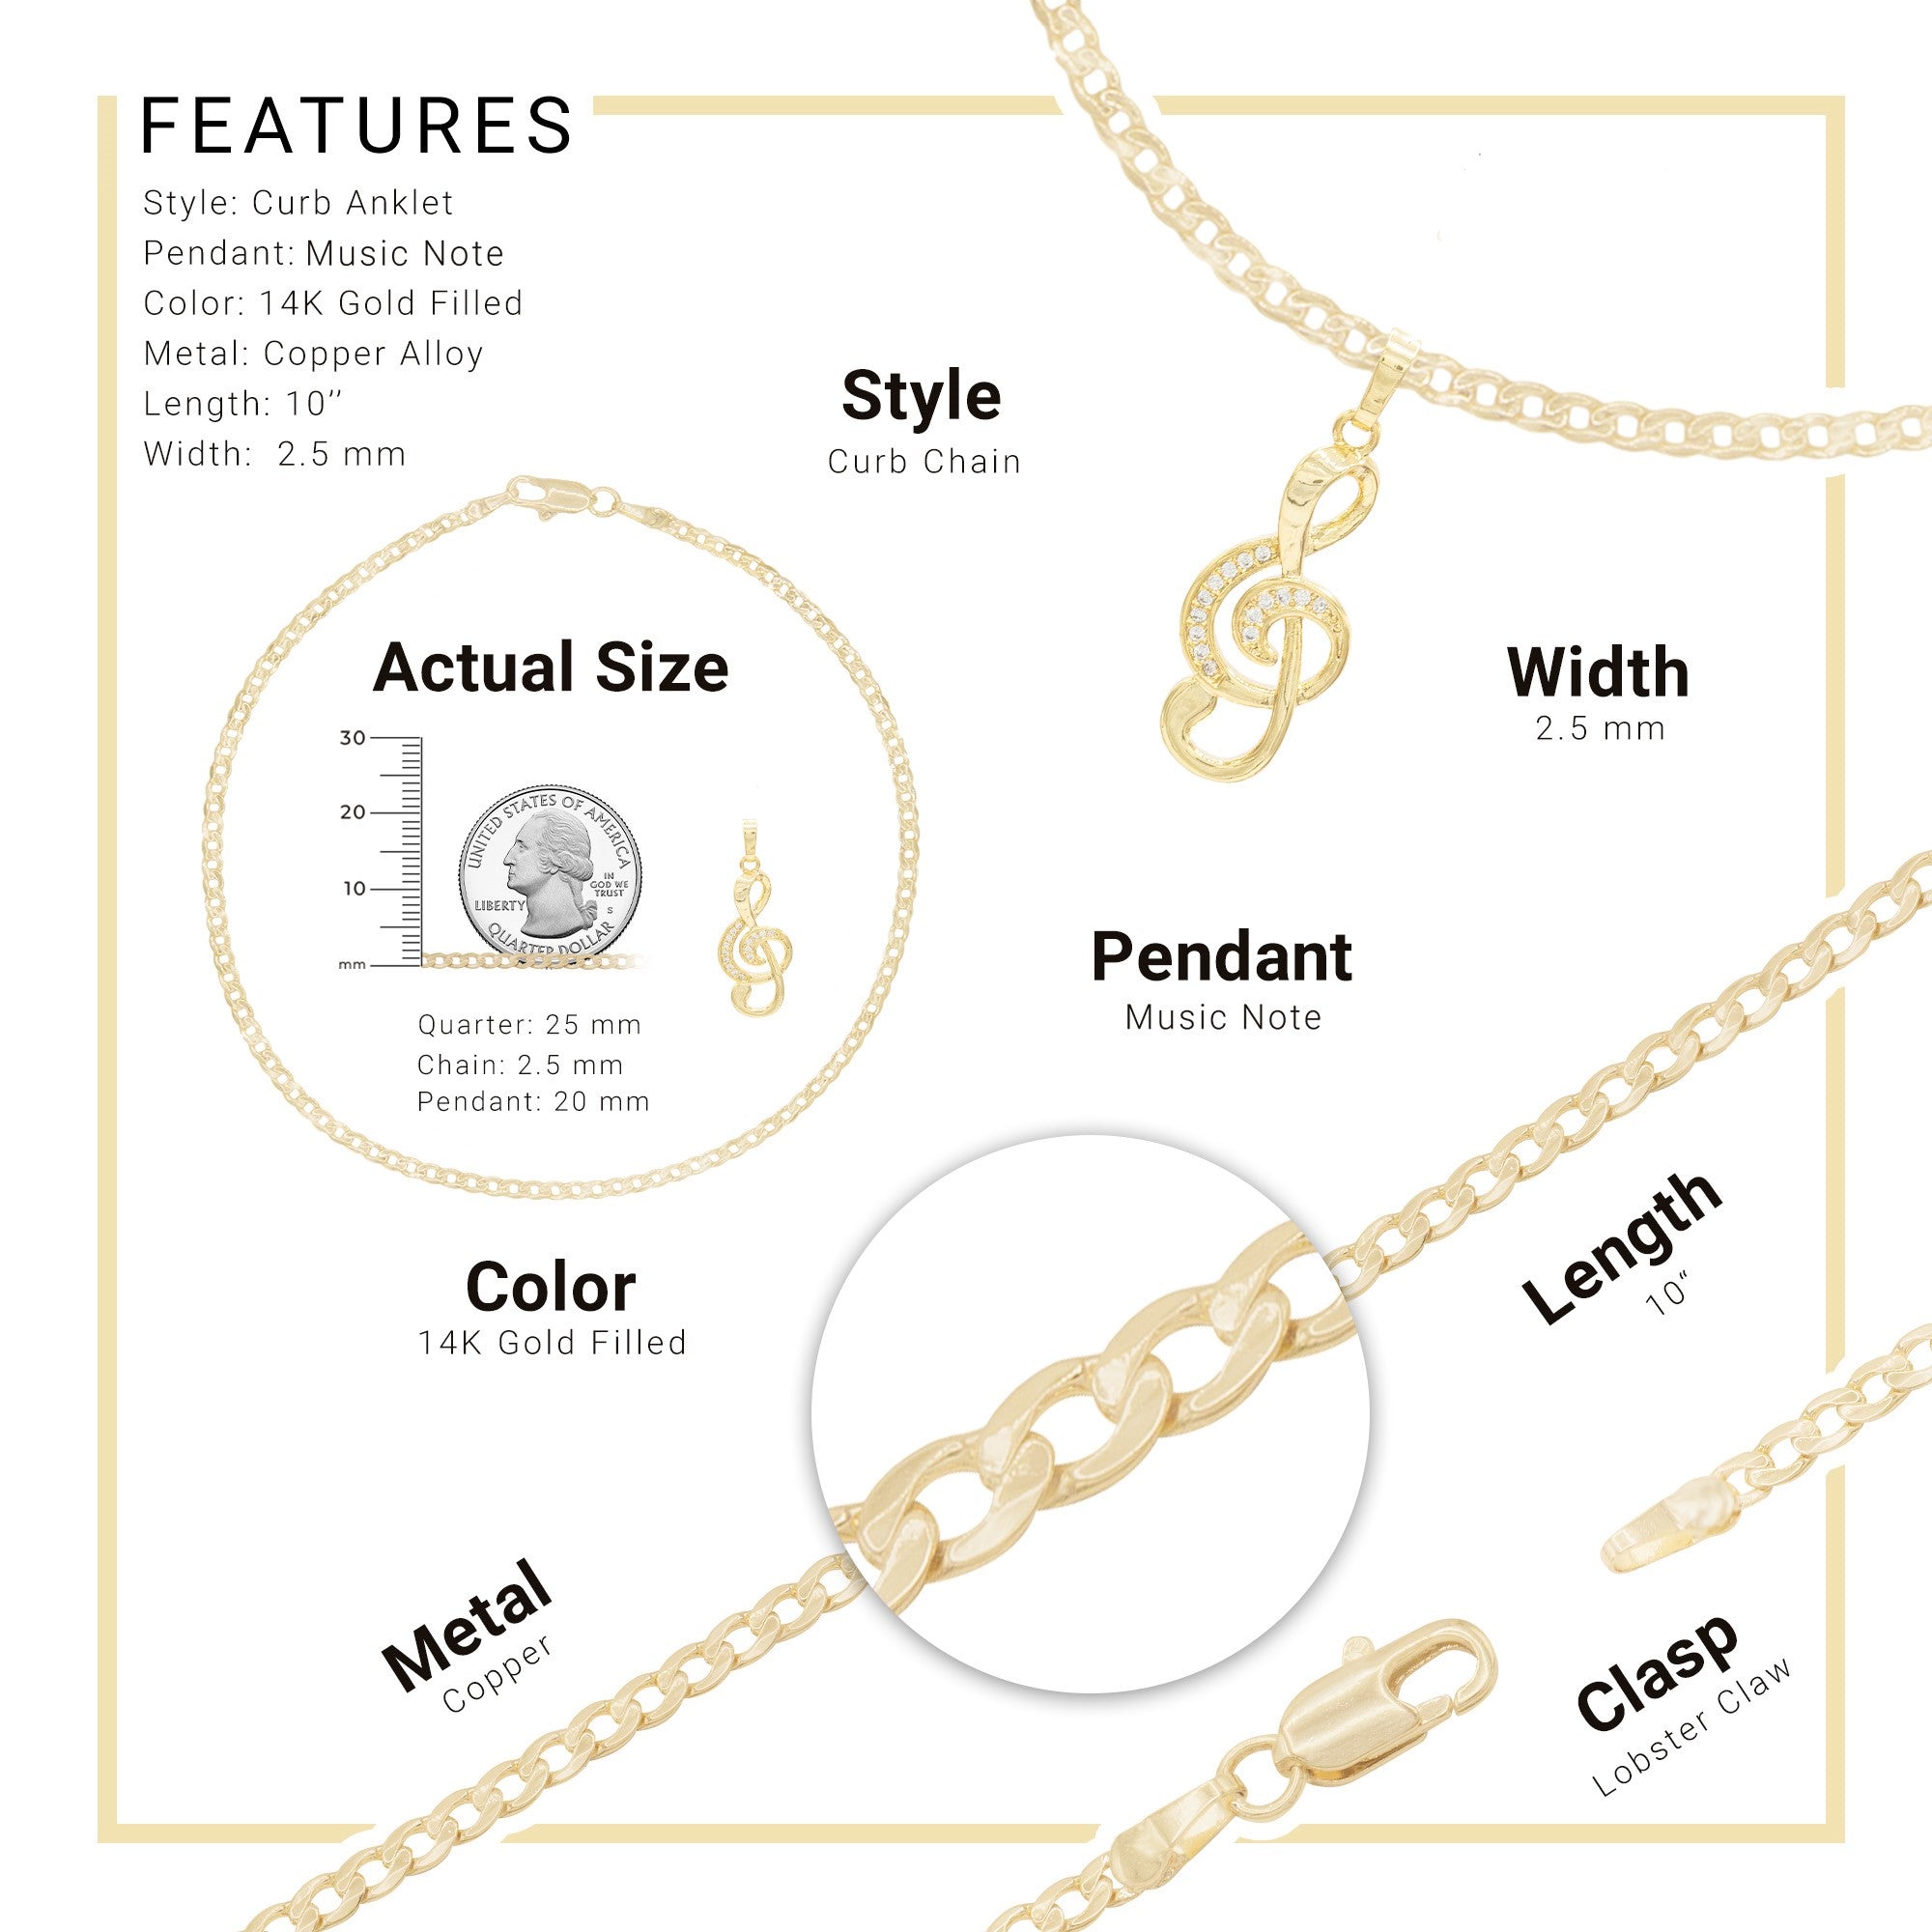 Music Note Pendant 14K Gold Filled Cubic Zirconia Anklet 10" Set 2.5 mm Women Jewelry